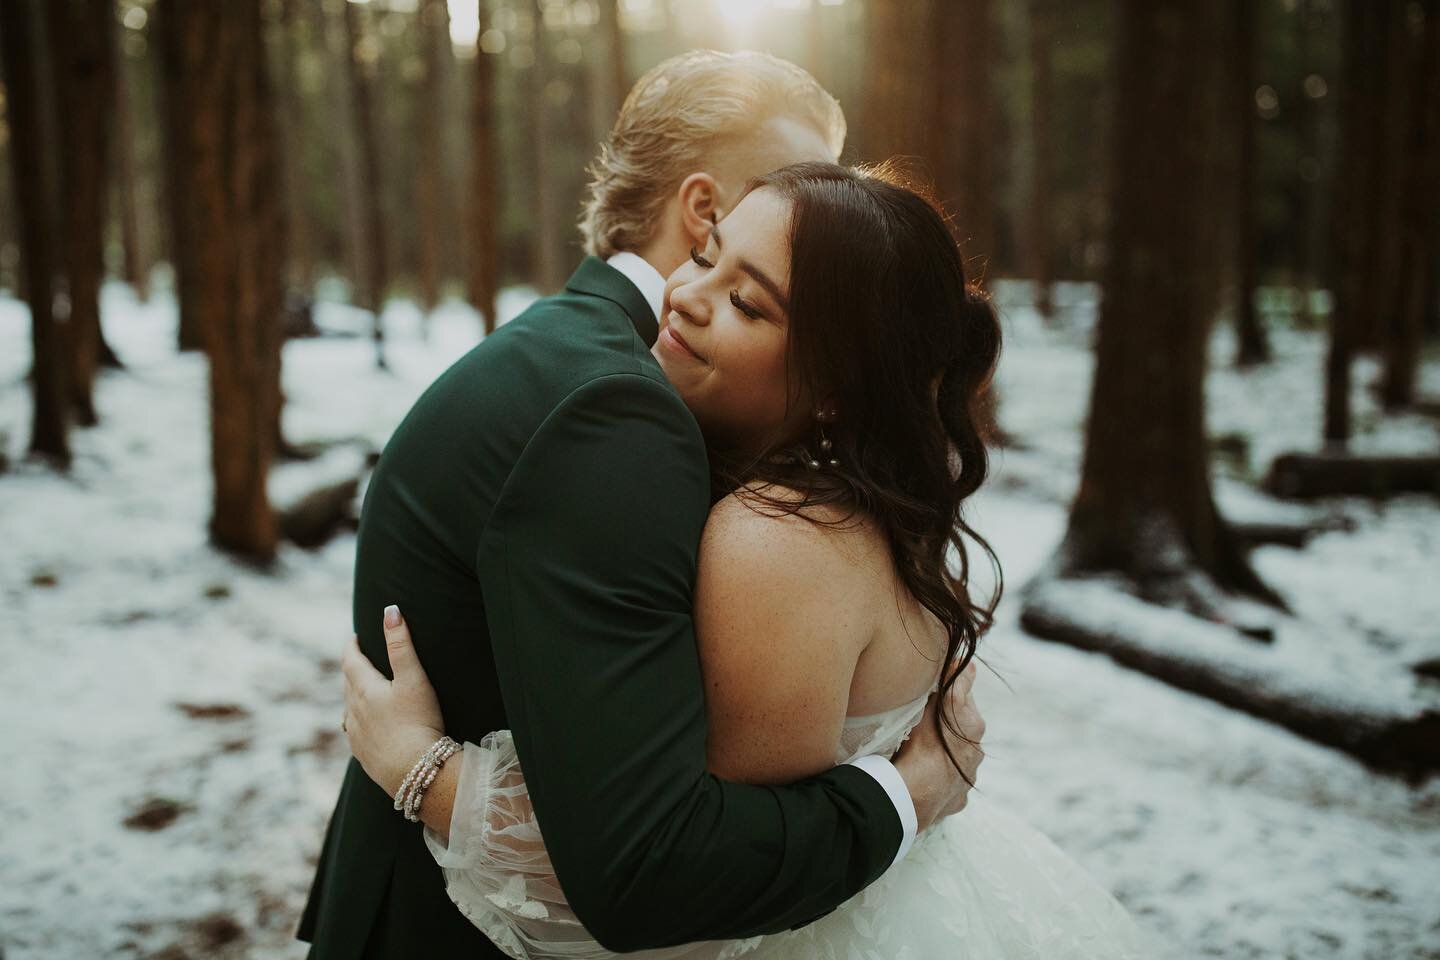 It&rsquo;s been a minute since I&rsquo;ve posted but I HAD to share a few from this gorgeous winter wedding this past weekend ❄️

Thank you Levi + Nyah for letting me capture your special day ✨

#powellriverwedding #powellriverweddingphotographer #po